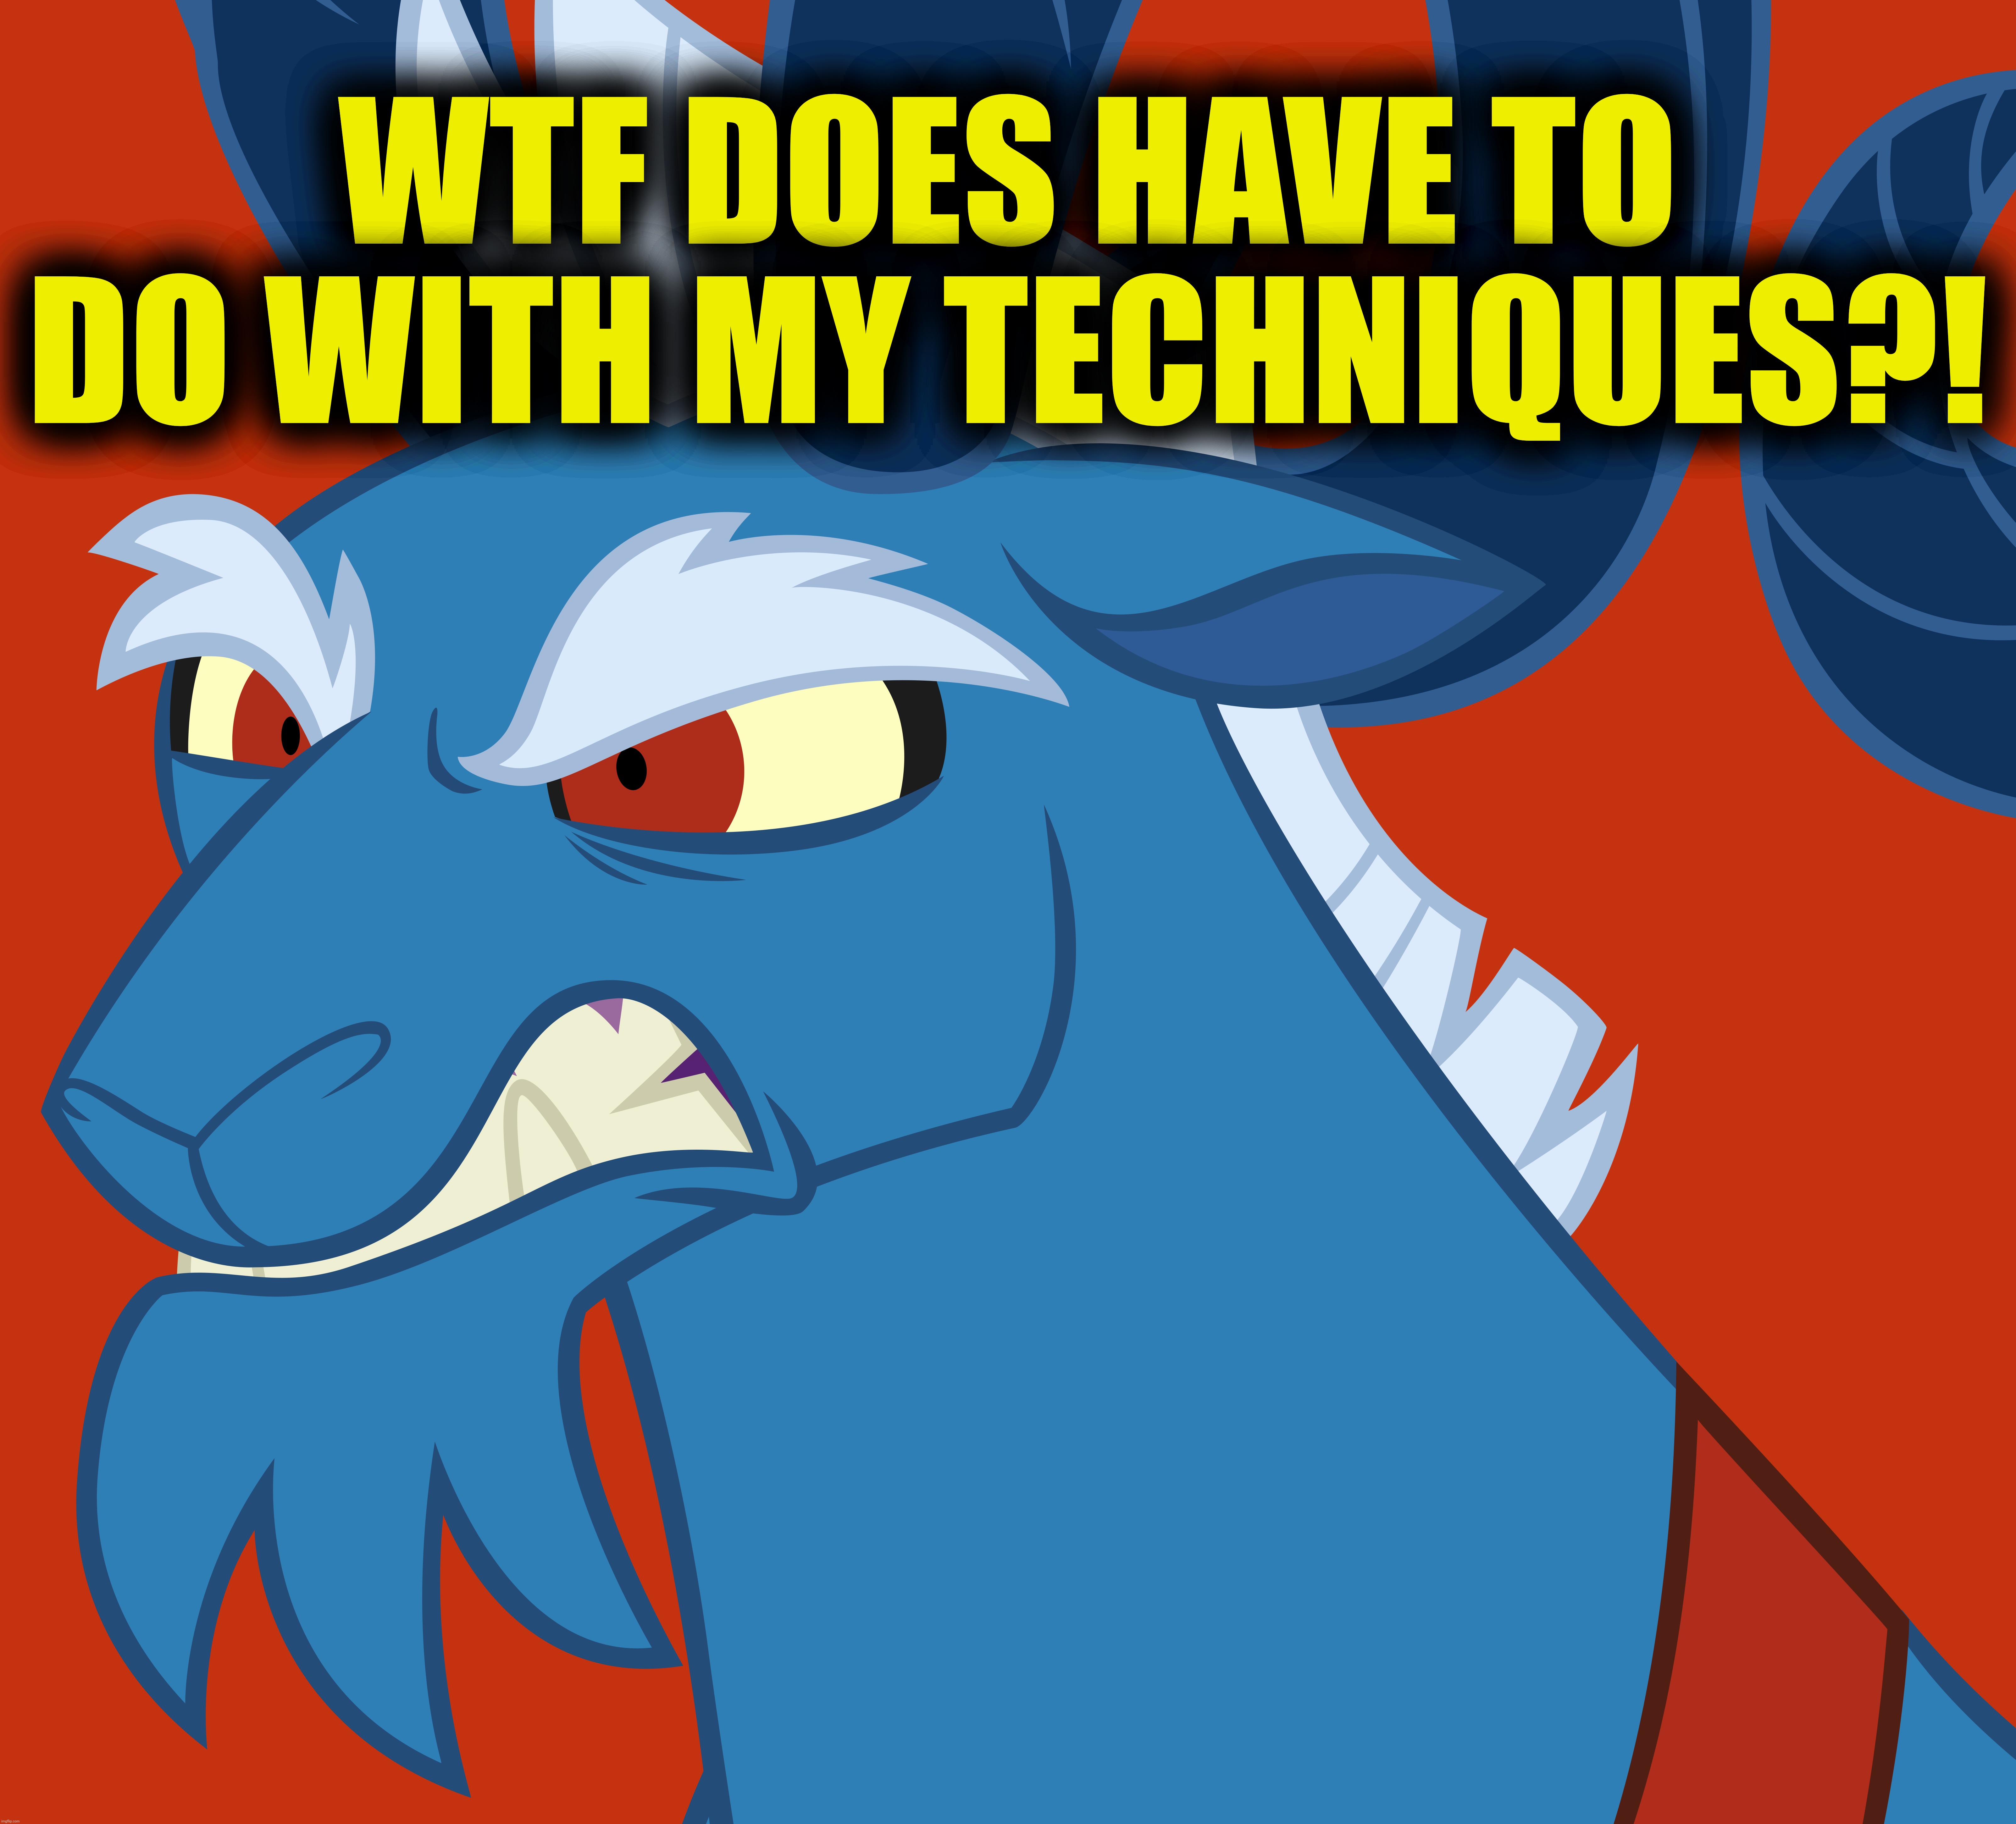 WTF DOES HAVE TO DO WITH MY TECHNIQUES?! | made w/ Imgflip meme maker